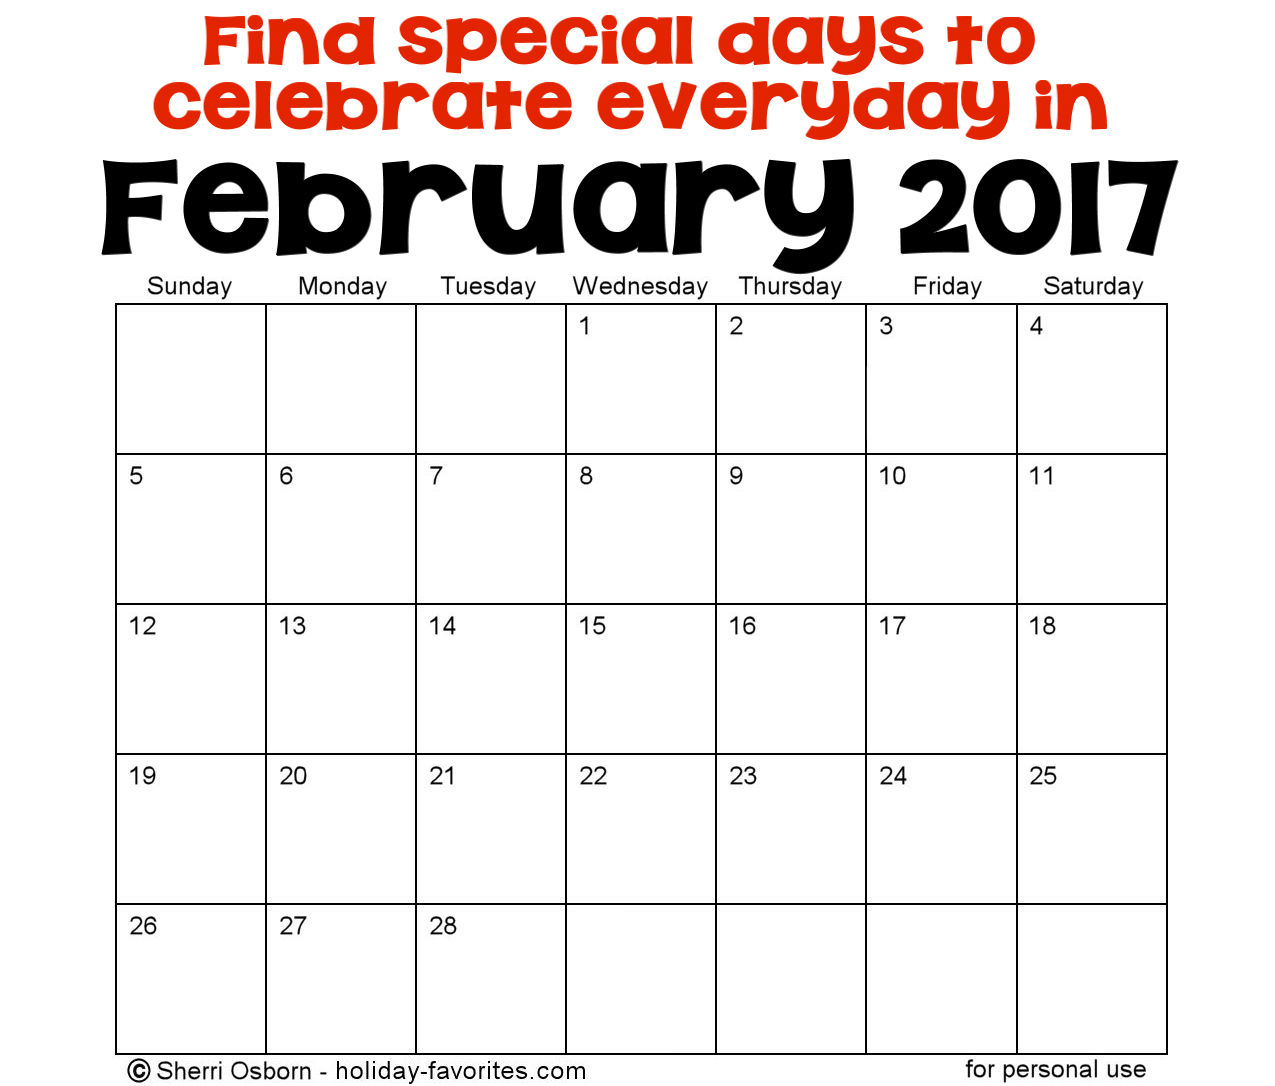 february-holidays-and-special-days-holiday-favorites